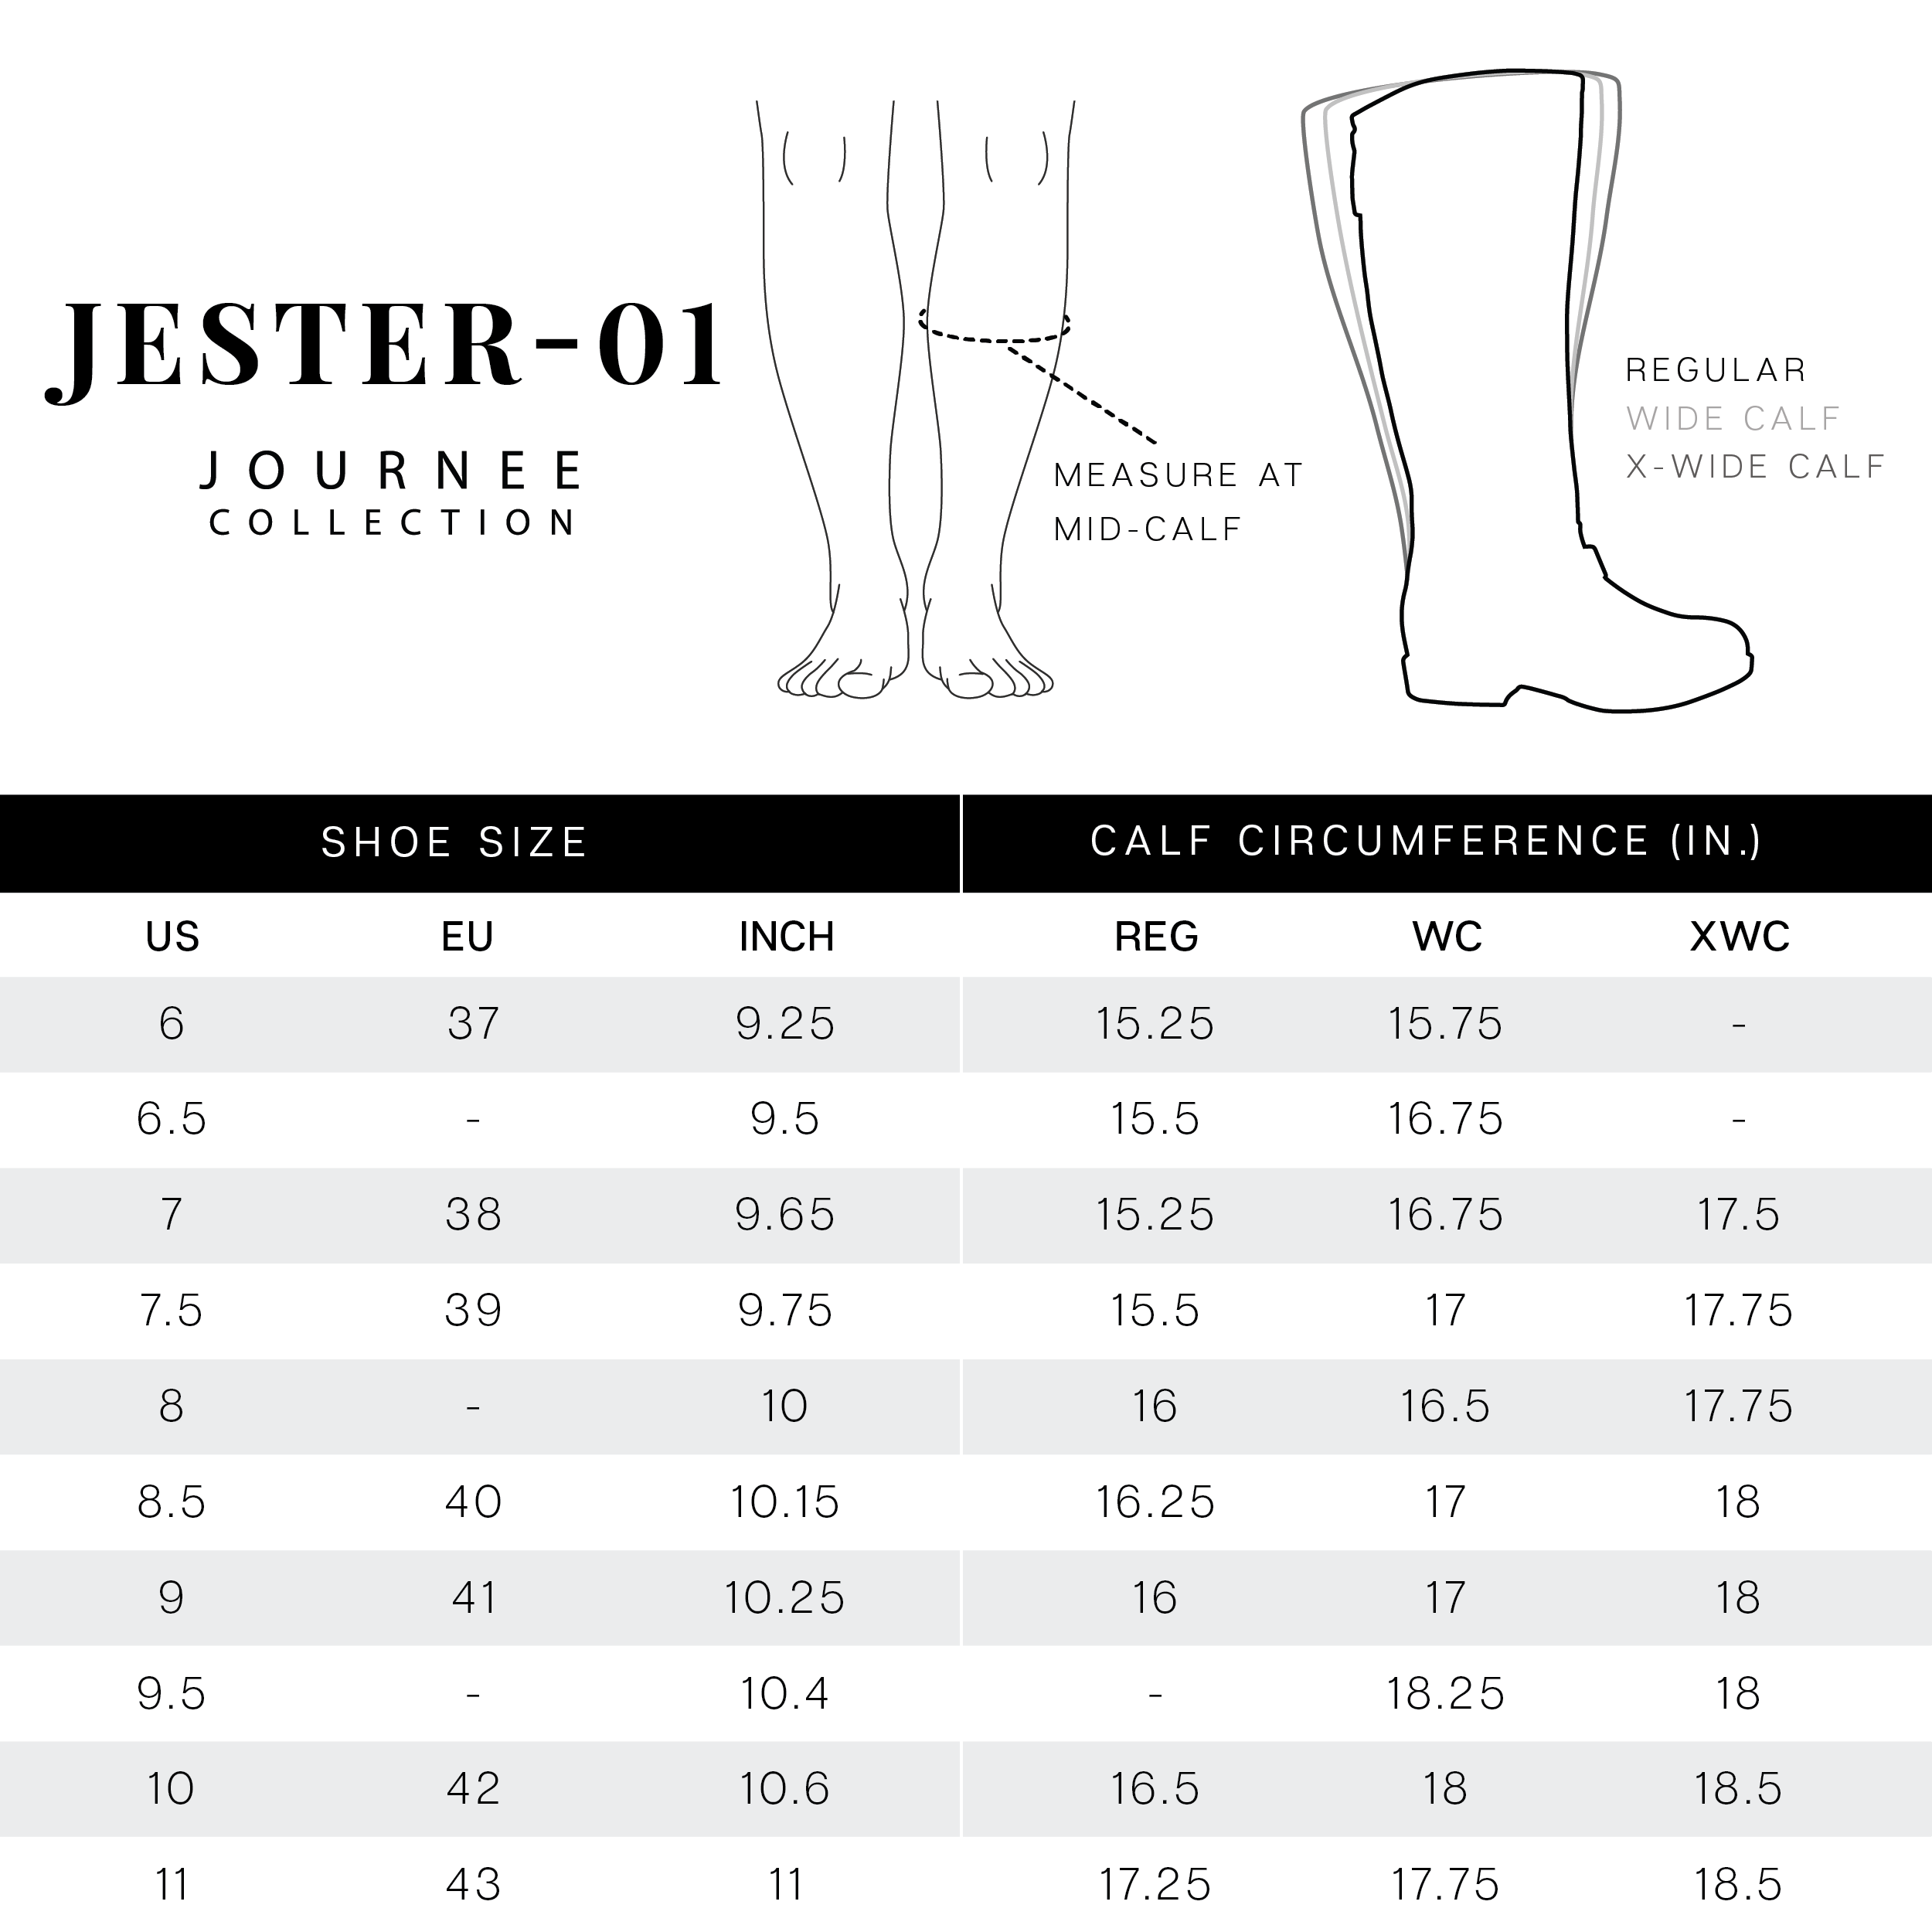 JESTER WIDE CALF - Journee Collection